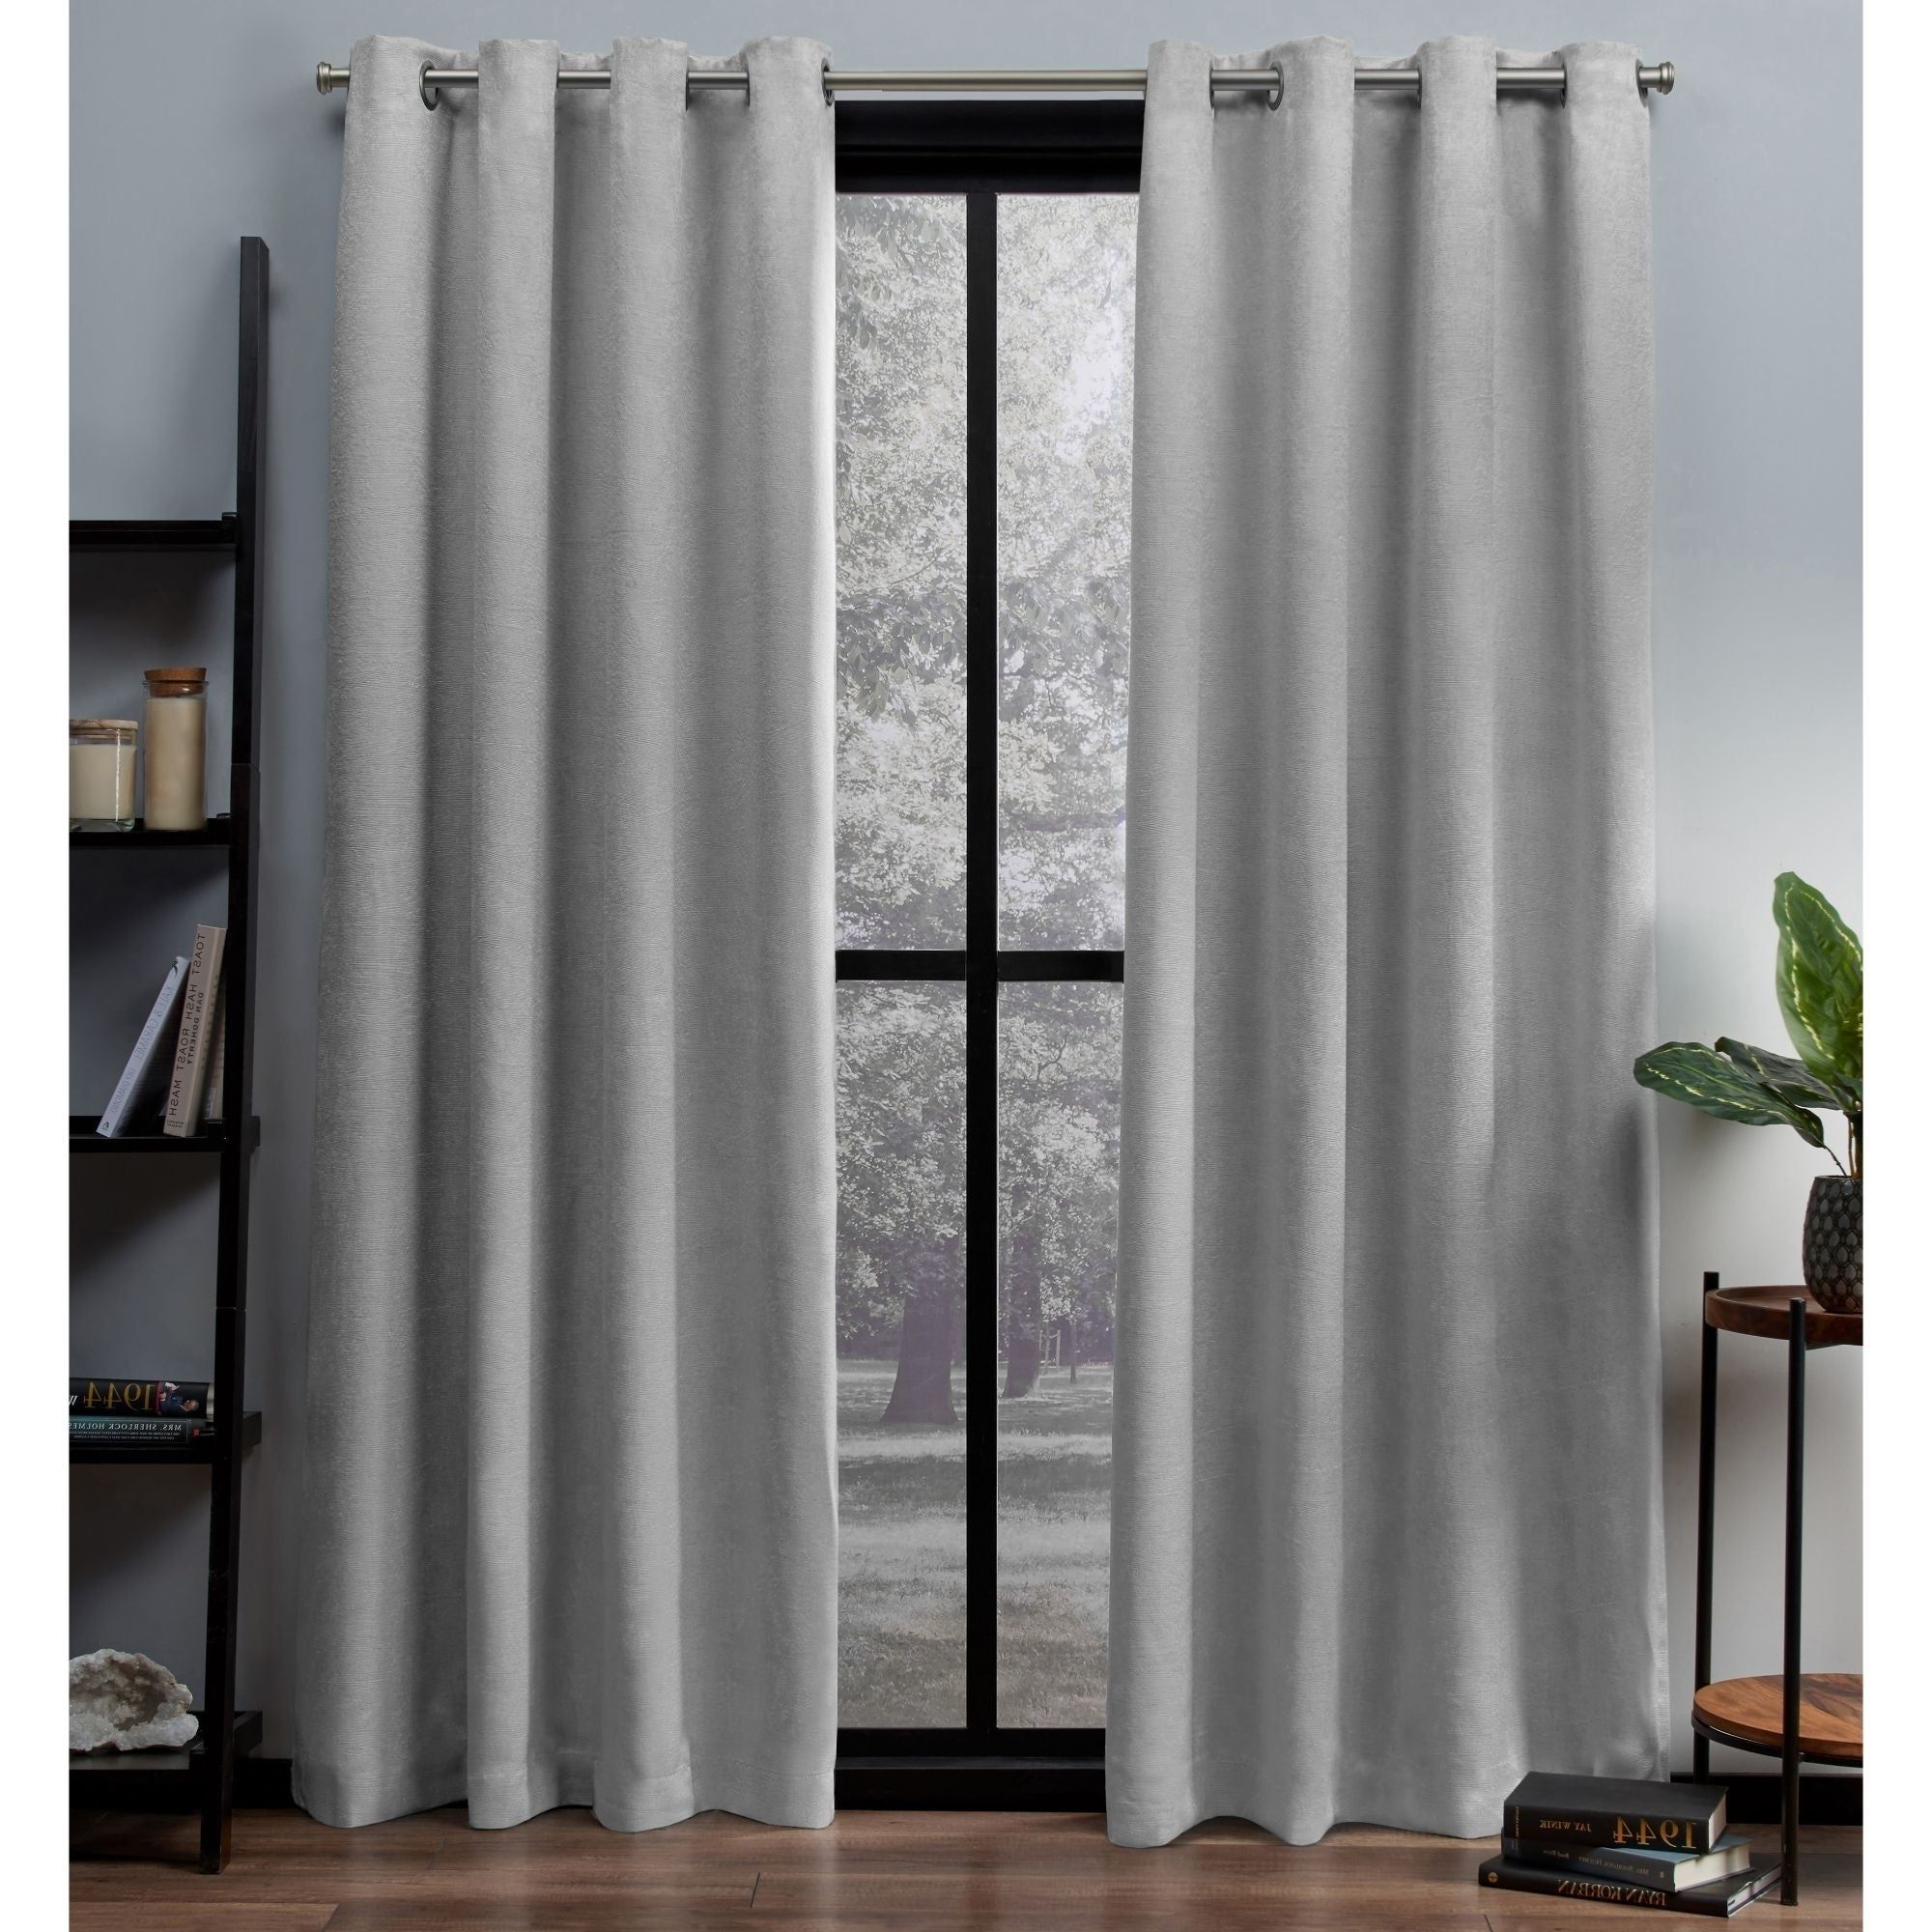 Best And Newest Ati Home Oxford Sateen Woven Blackout Grommet Top Curtain Panel Pair Intended For Oxford Sateen Woven Blackout Grommet Top Curtain Panel Pairs (View 1 of 20)